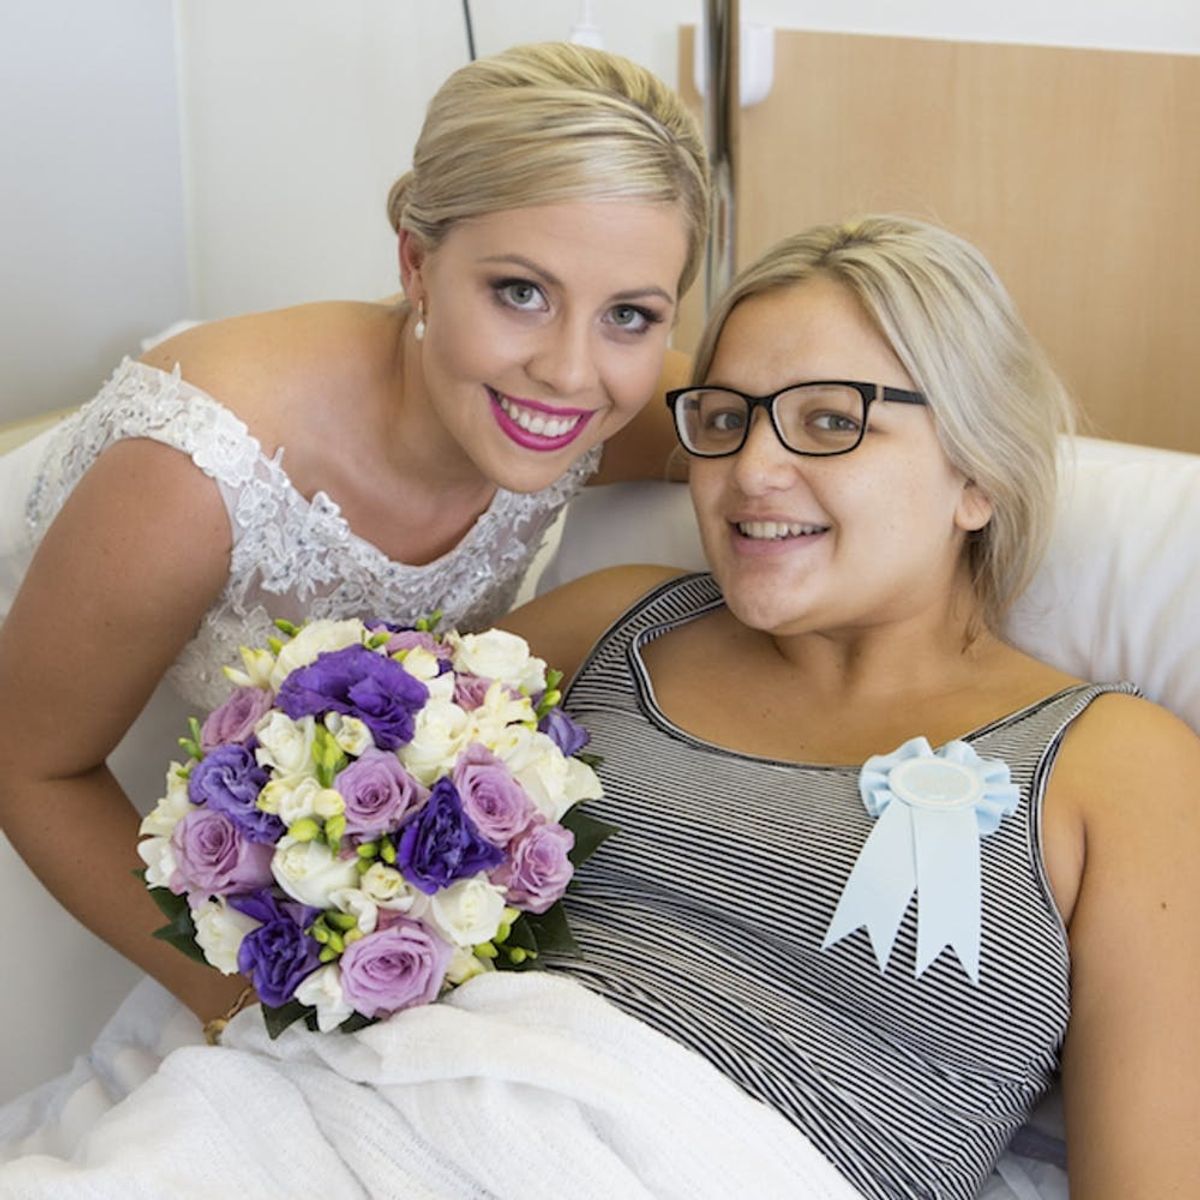 This Is What Happened When a Bridesmaid Went Into Labor On the Wedding Day